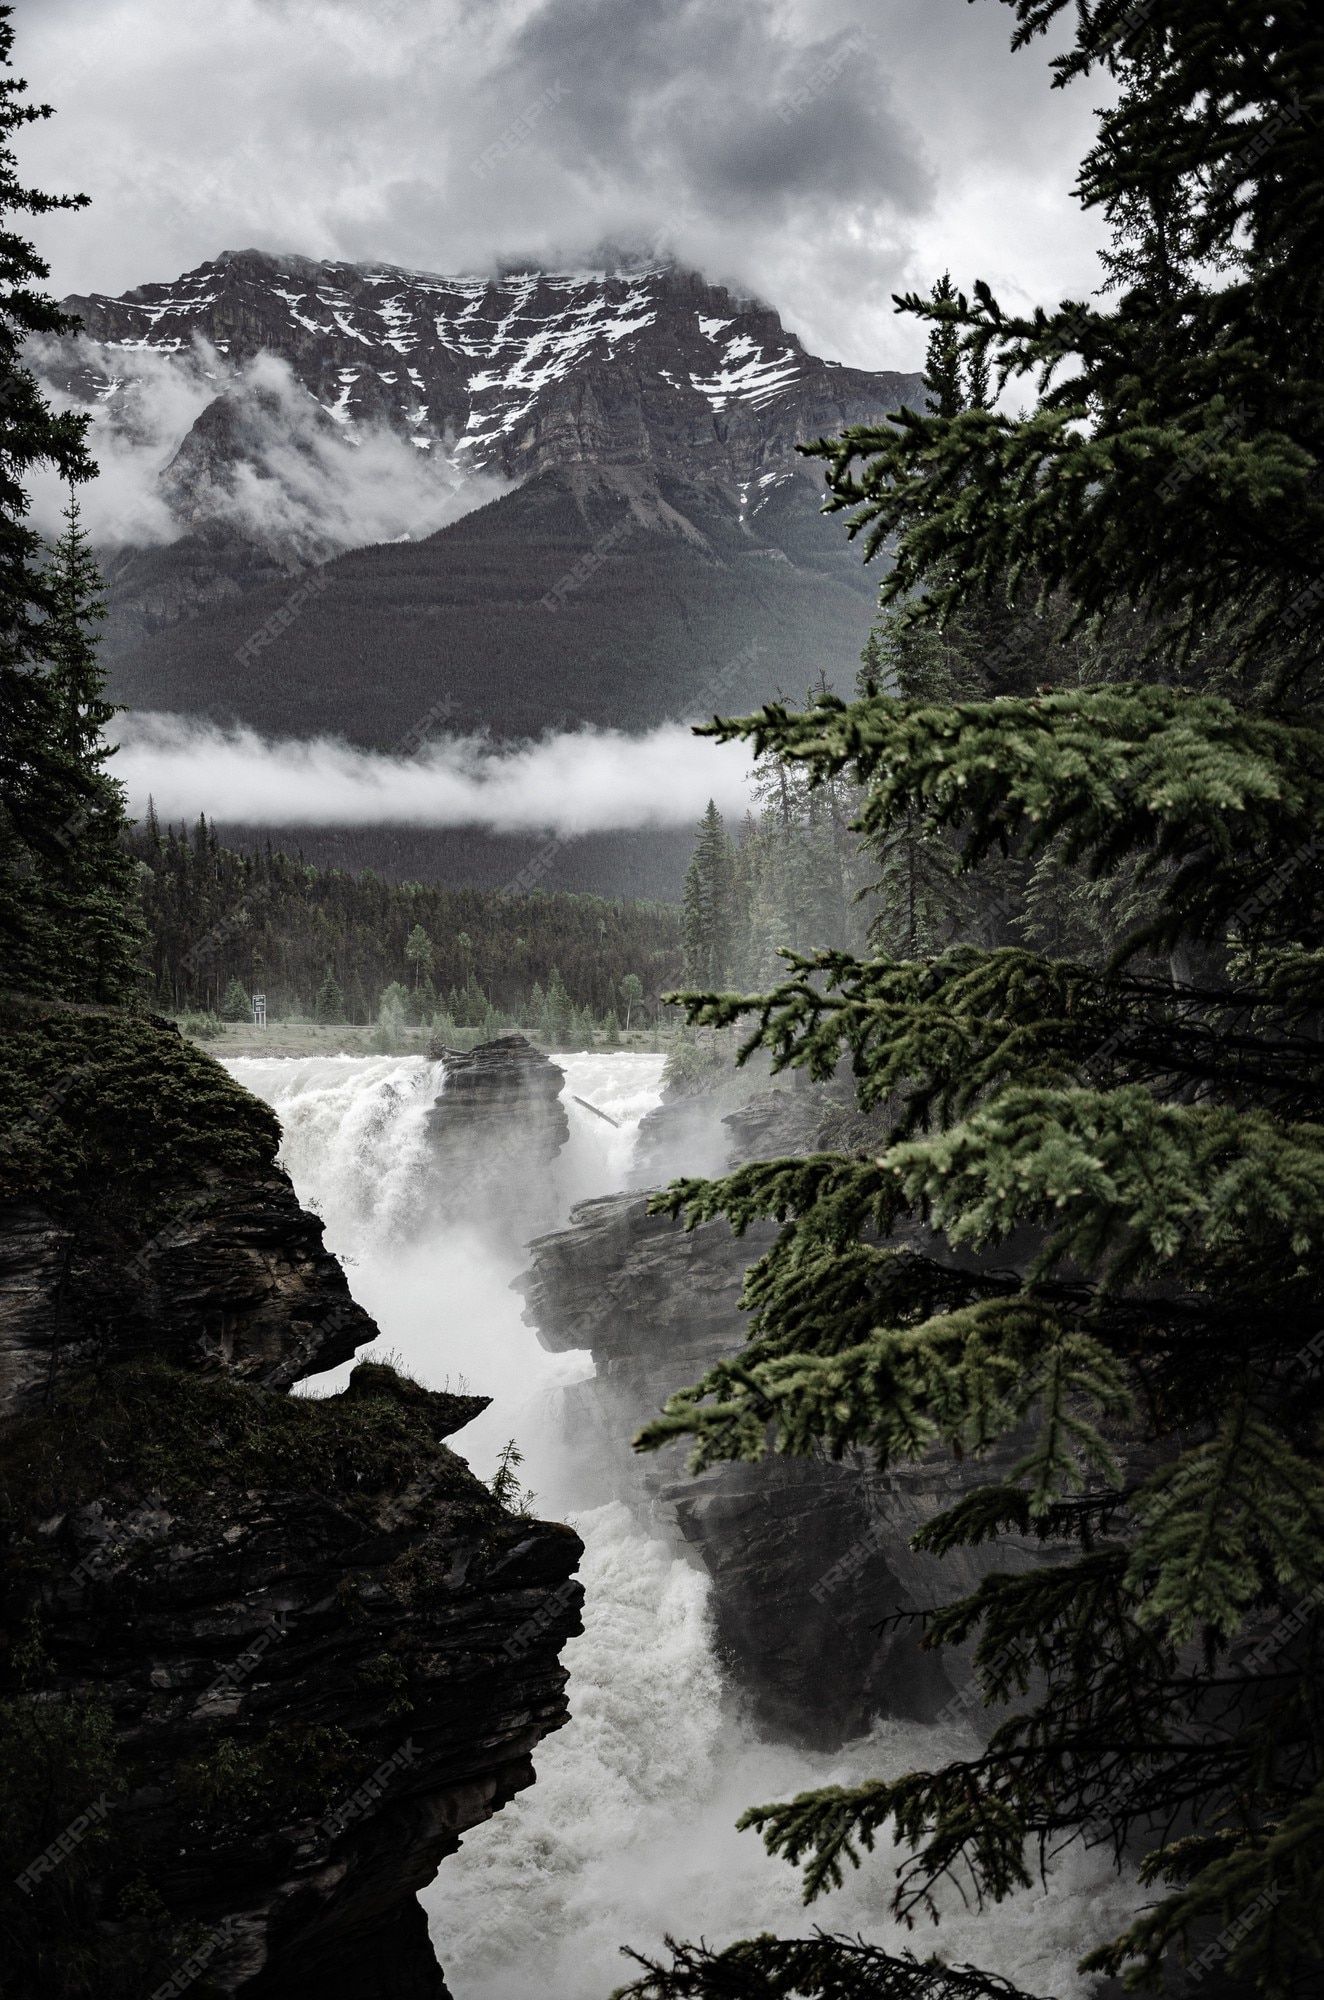 Free Photo. Beautiful scenery of a powerful waterfall surrounded by rocky cliffs and trees in canada